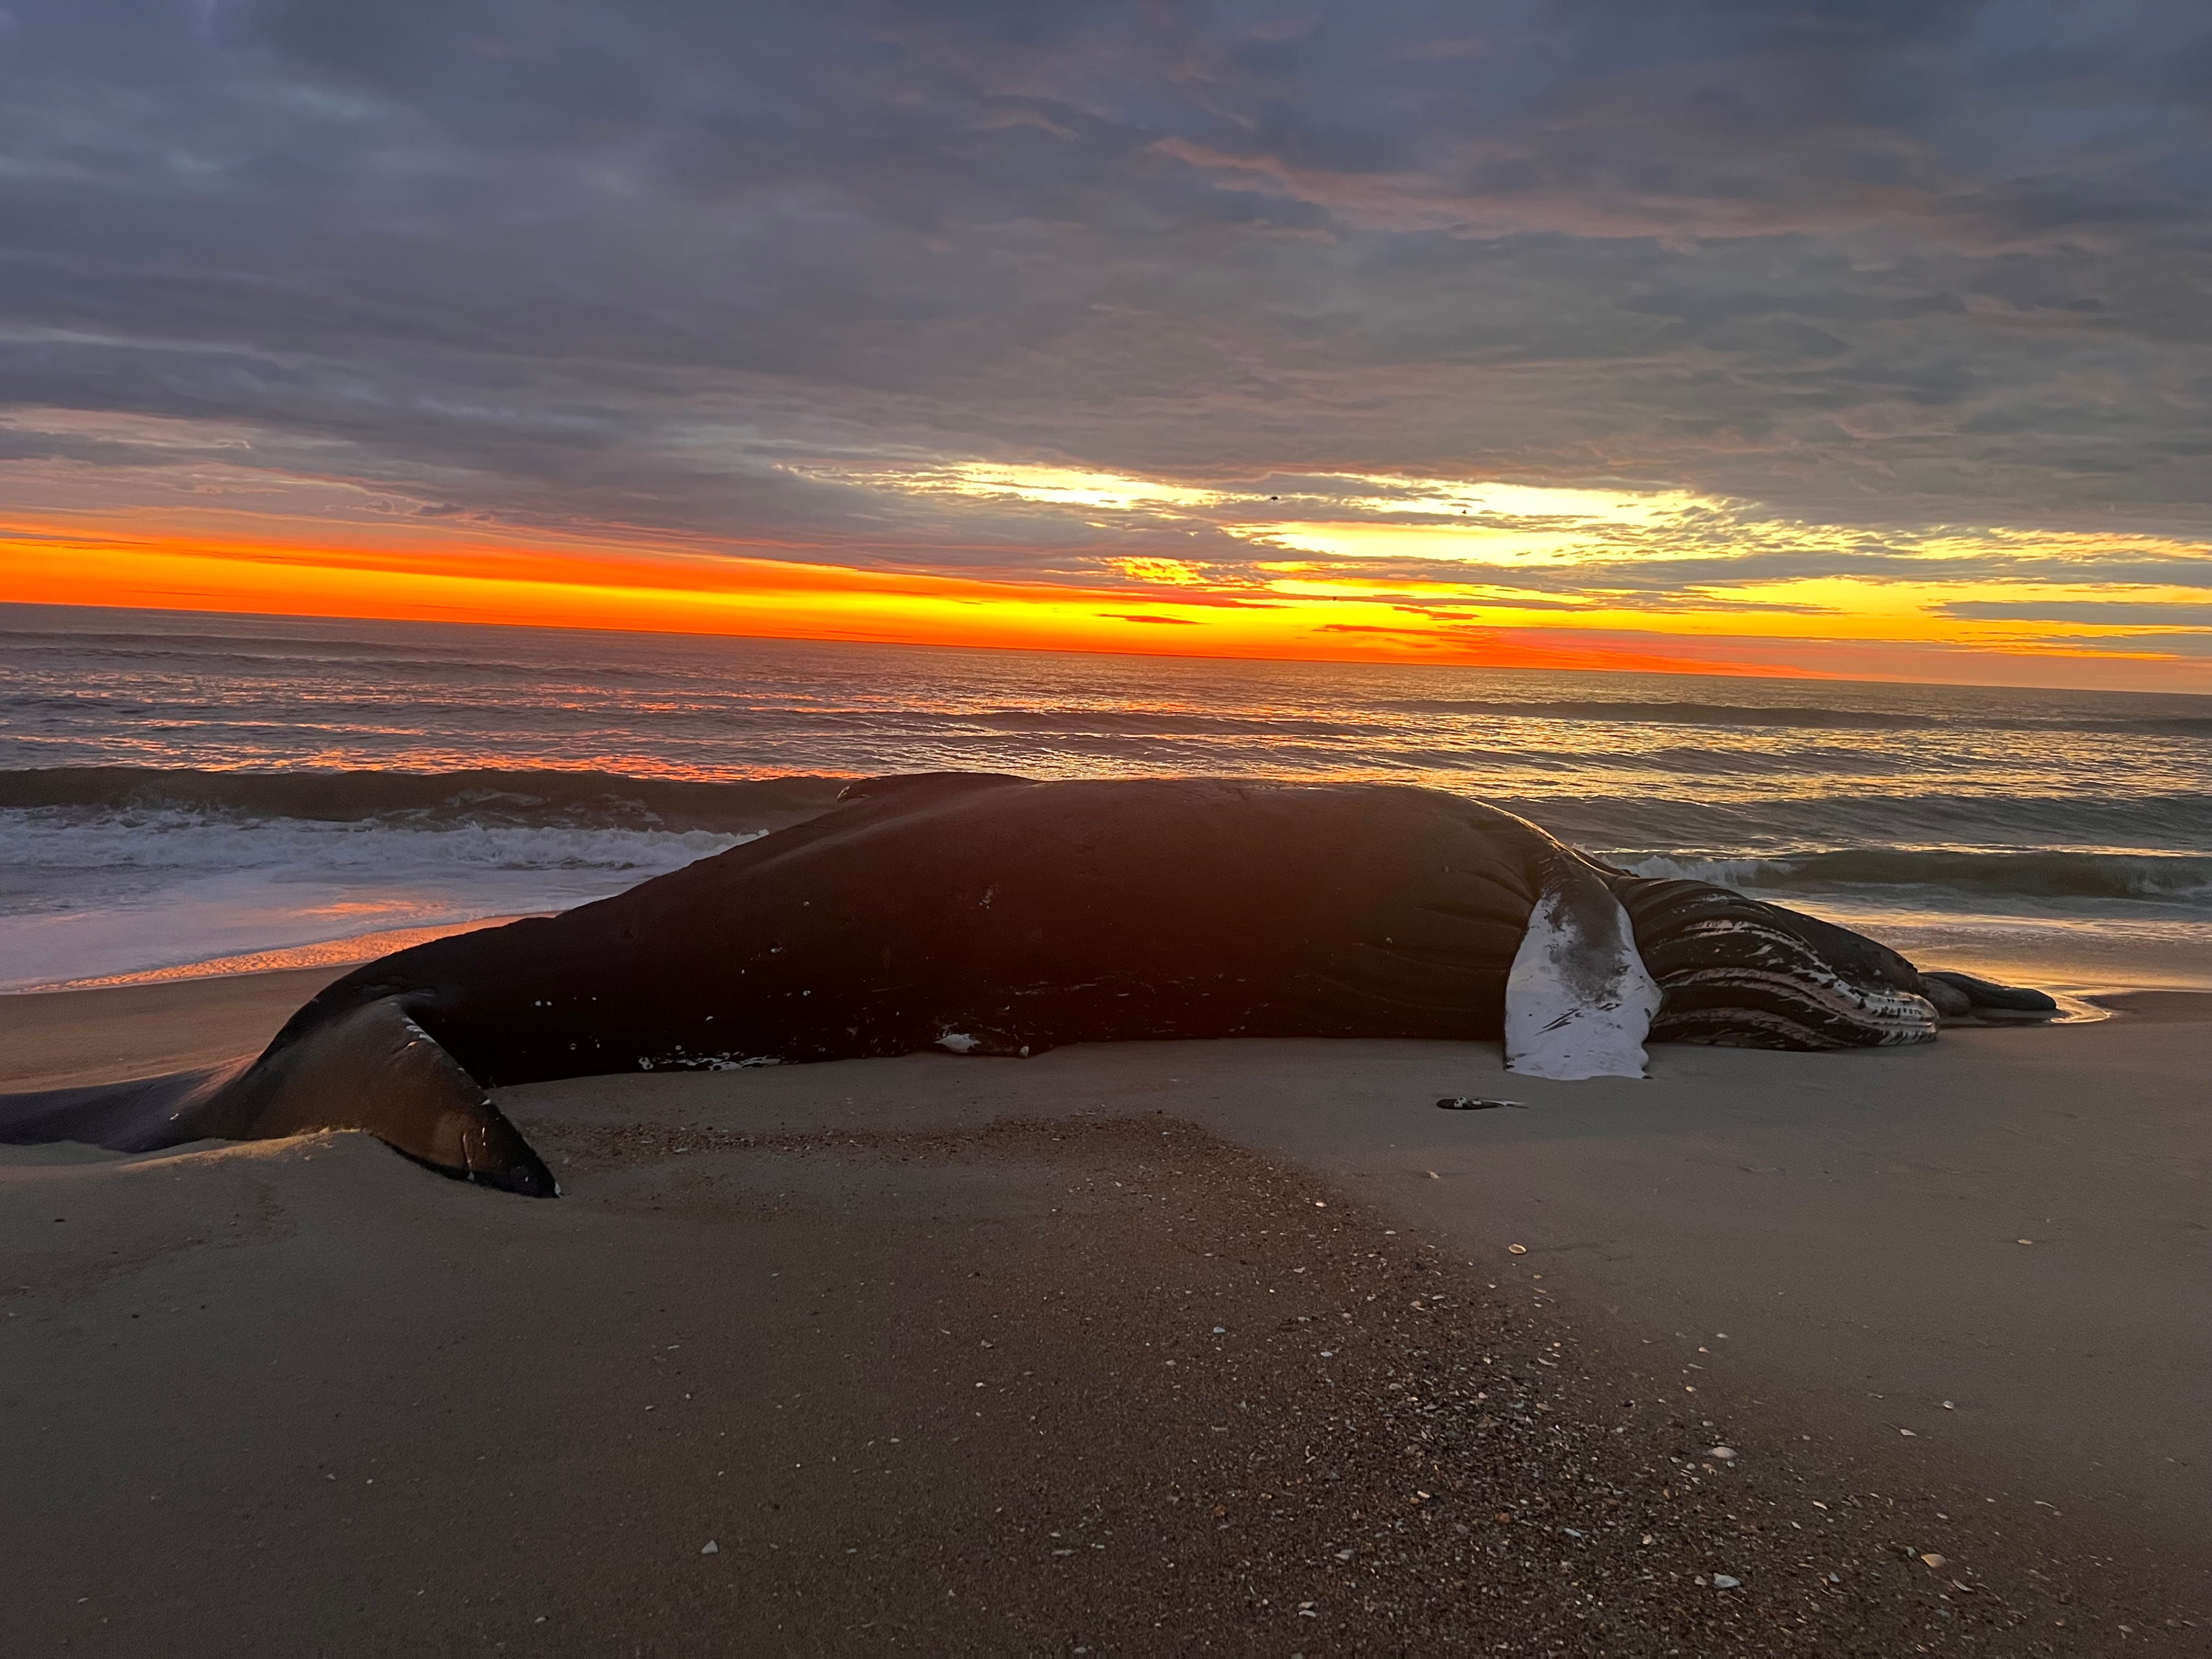 Feds research whale mystery after more than a dozen dead whales wash up along East Coast